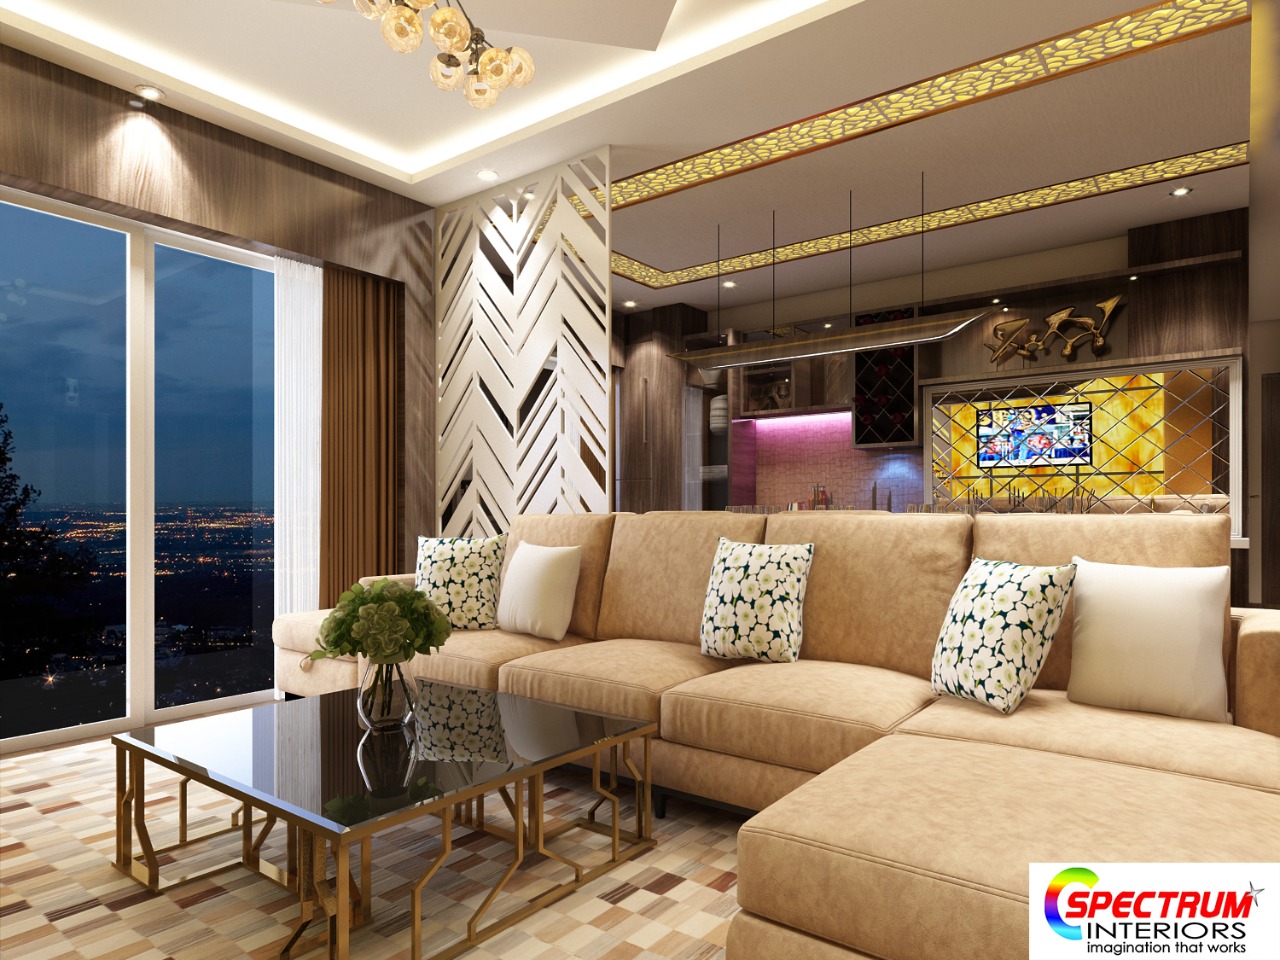 Know the Prerequisites Before Hiring the Best Interior Designers in Kolkata